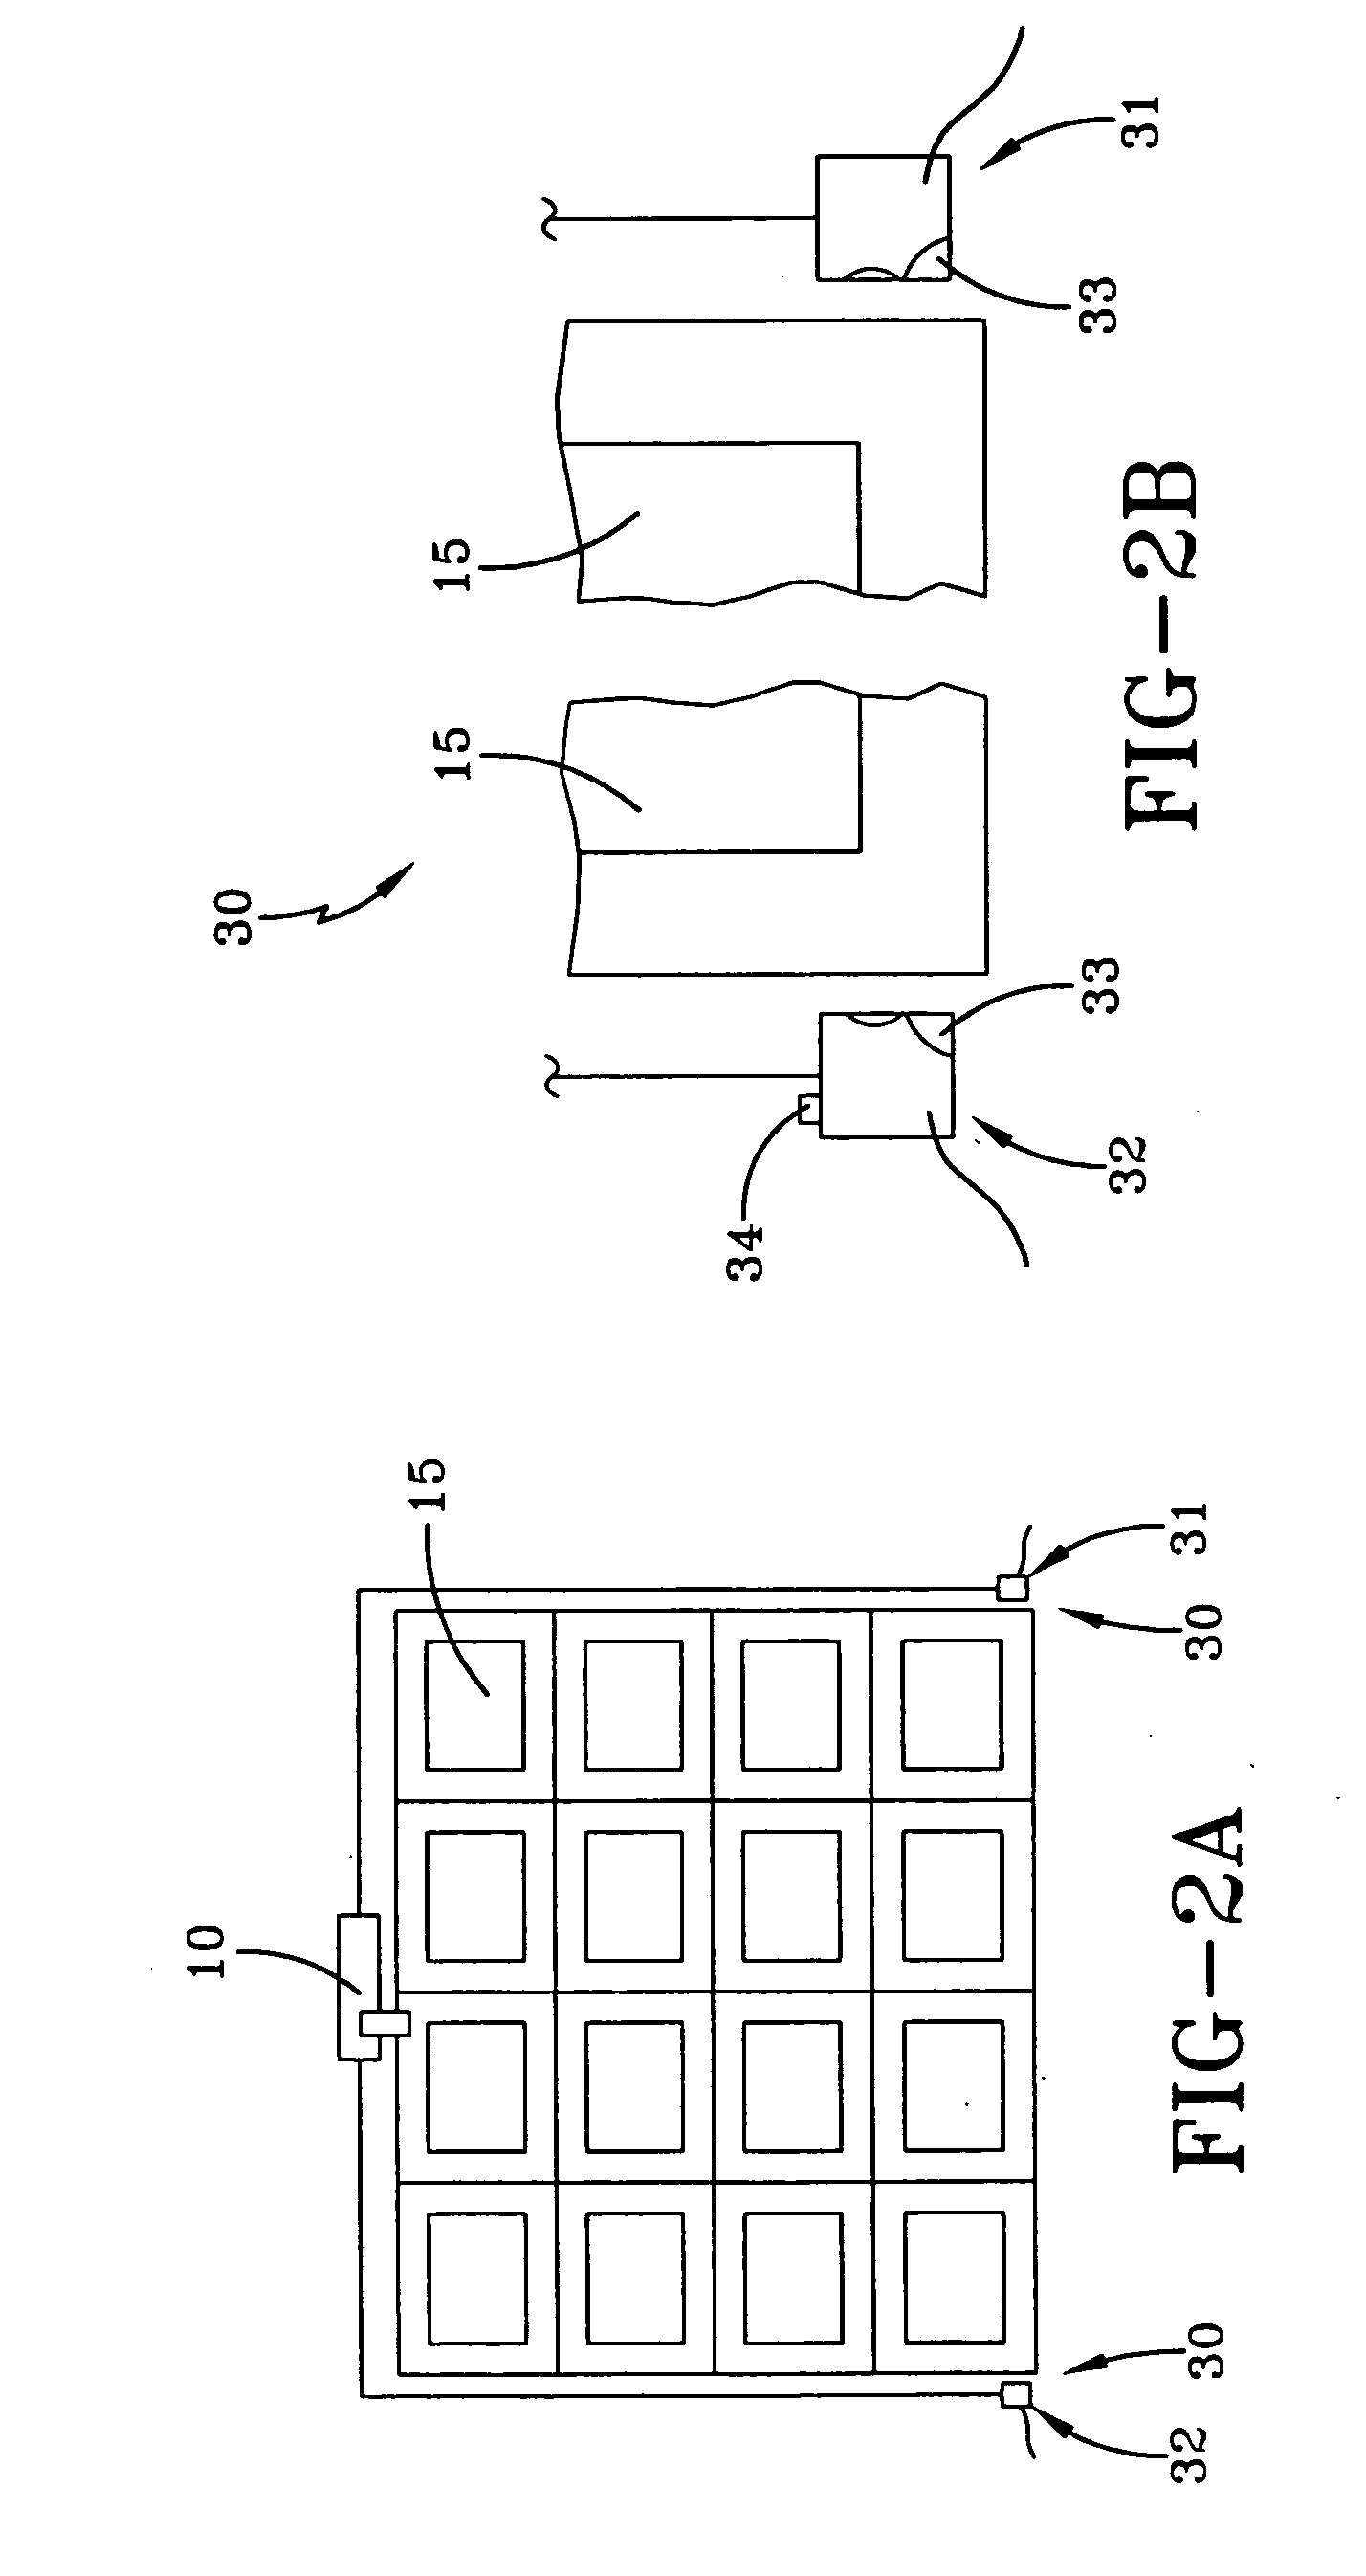 Uninterruptible power source for a barrier operator and related methods